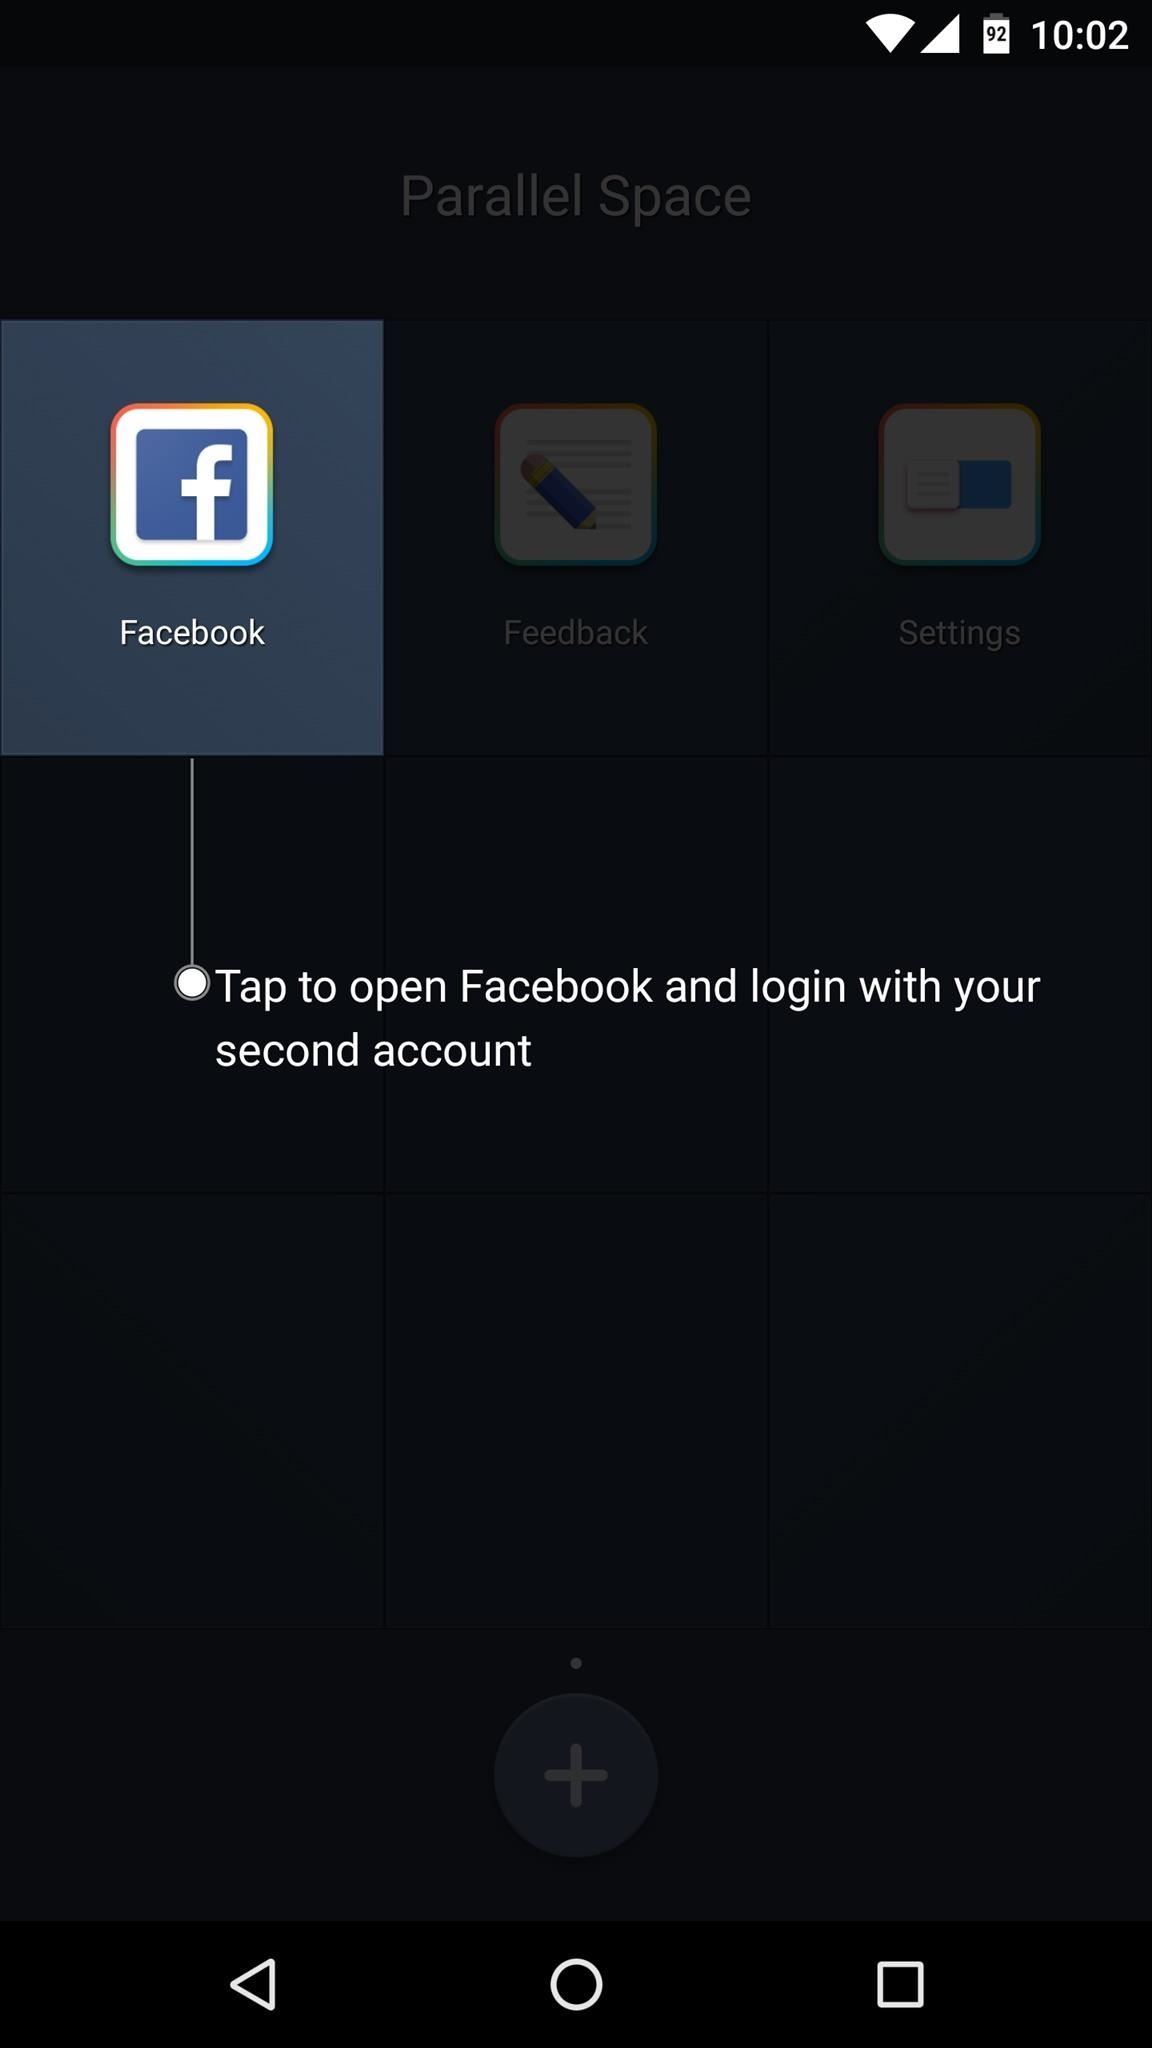 Make Copies of Your Apps to Stay Logged into Multiple Accounts at Once